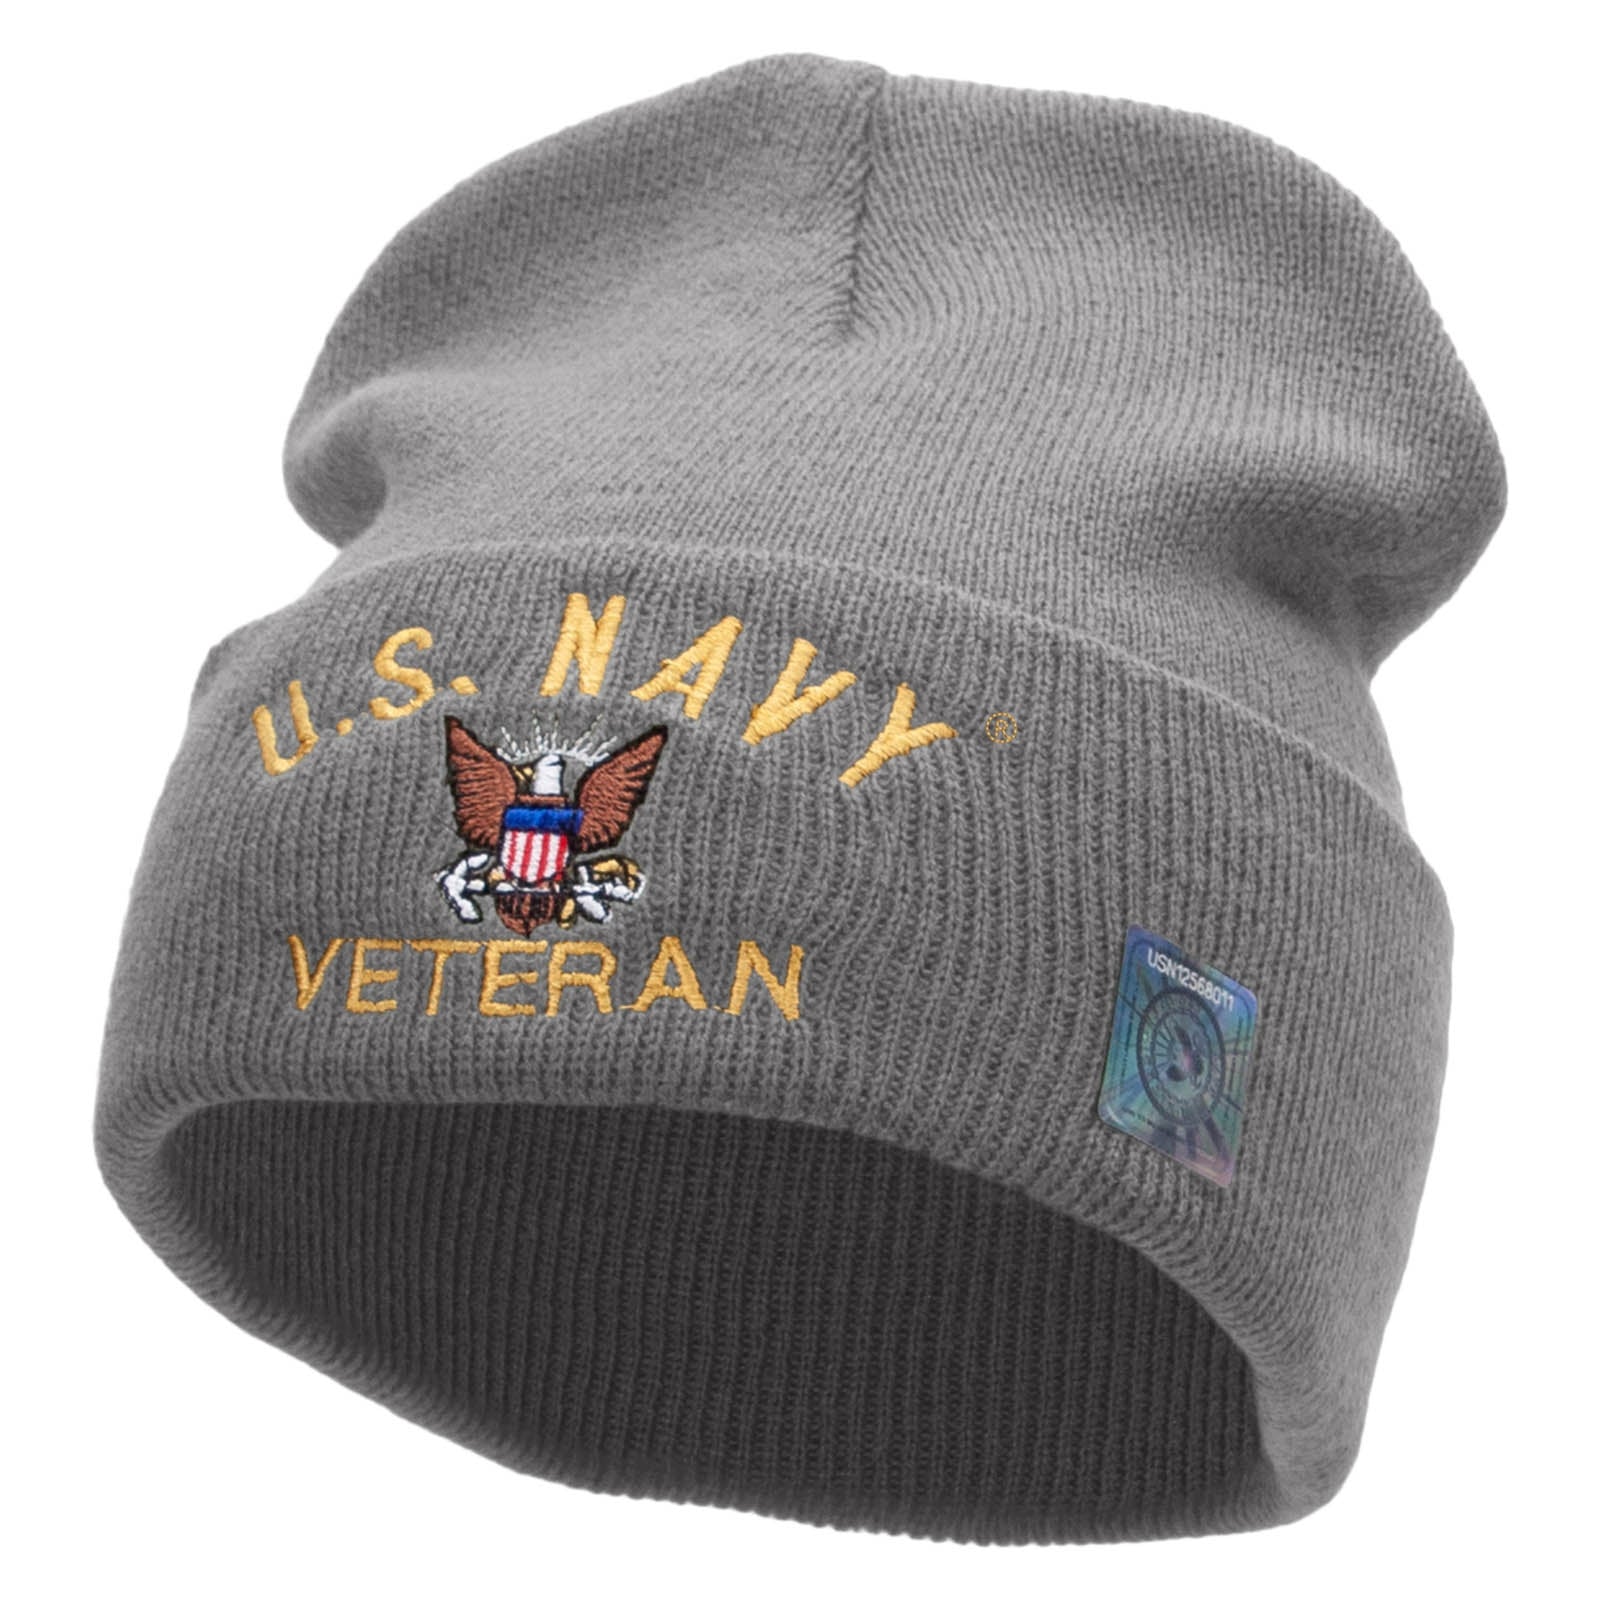 Licensed US Navy Veteran Military Embroidered Long Beanie Made in USA - Heather Grey OSFM